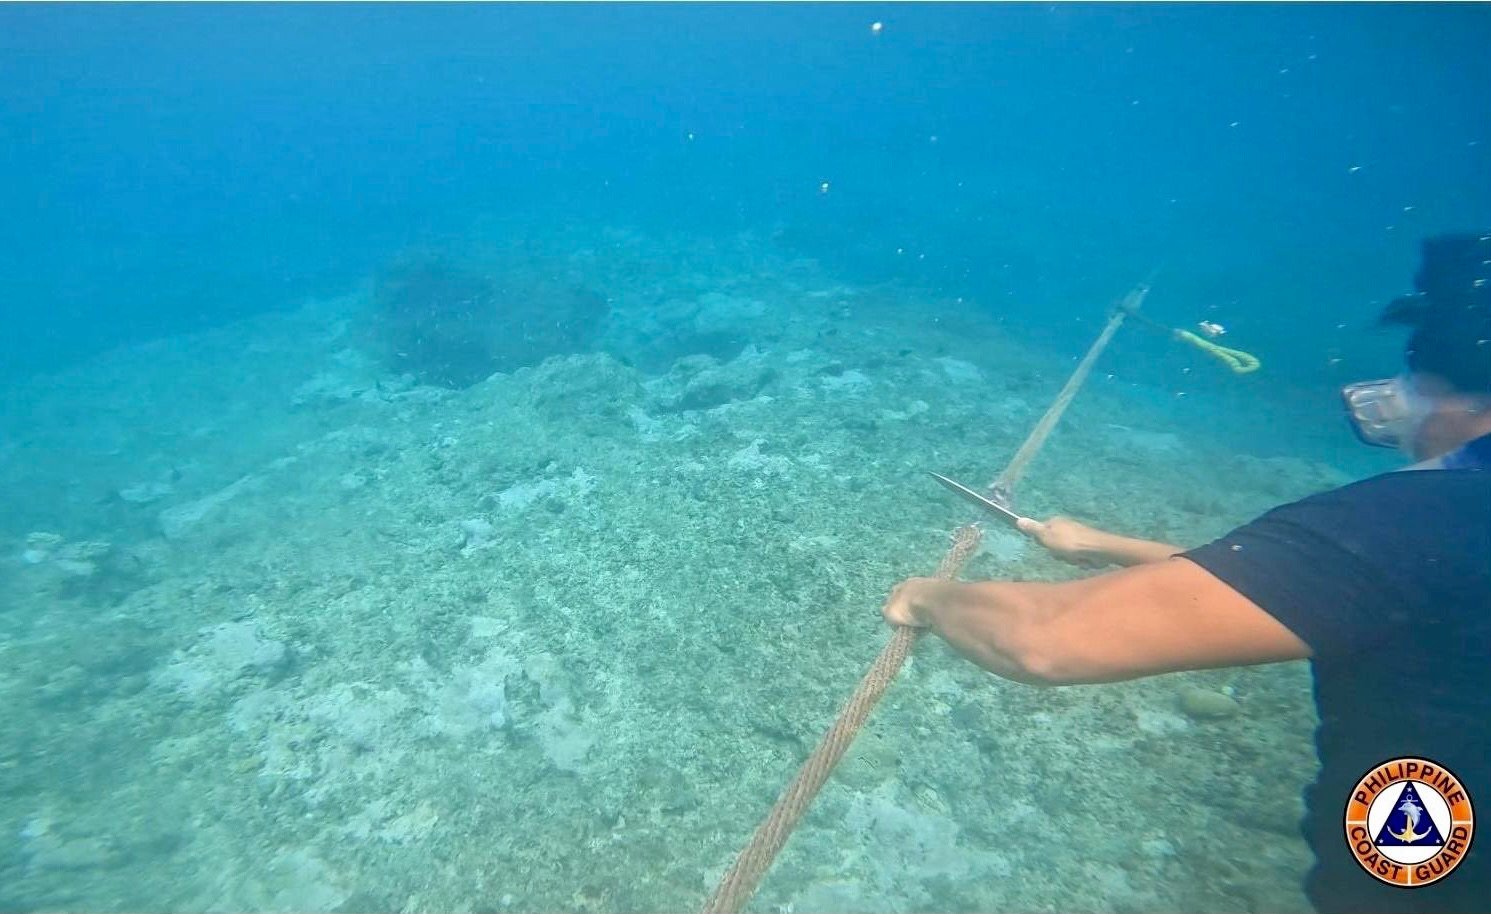 A photo released by the Philippine Coast Guard on Wednesday shows one of its members cutting a rope attached to a floating barrier blocking the entrance to Scarborough Shoal on September 21. Photo: EPA-EFE/Philippine Coast Guard